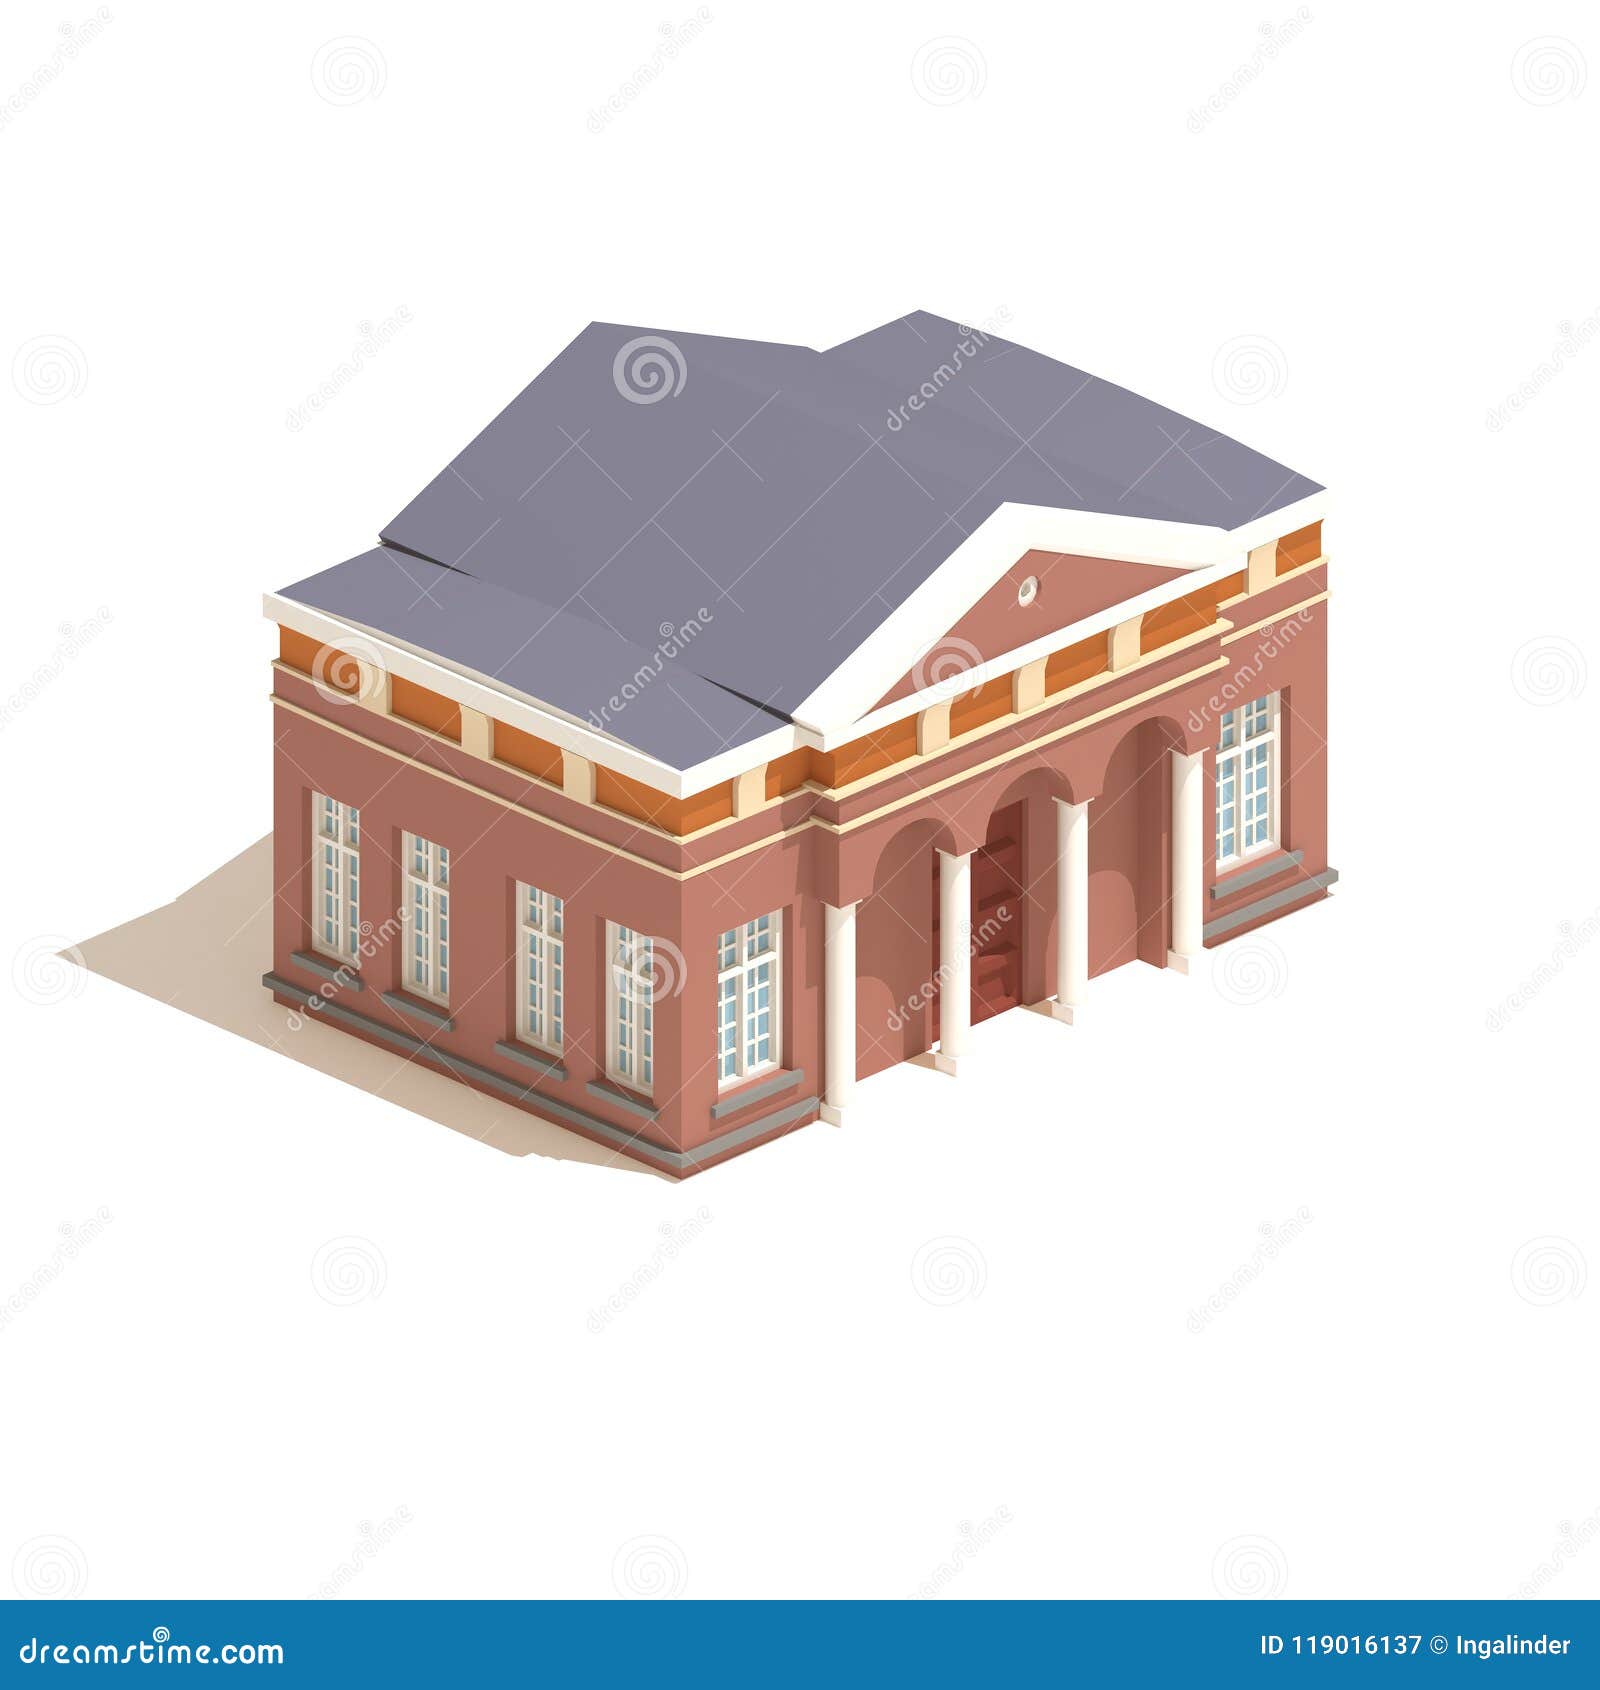 Library Building Cartoon Stock Illustrations – 1,379 Library Building  Cartoon Stock Illustrations, Vectors & Clipart - Dreamstime